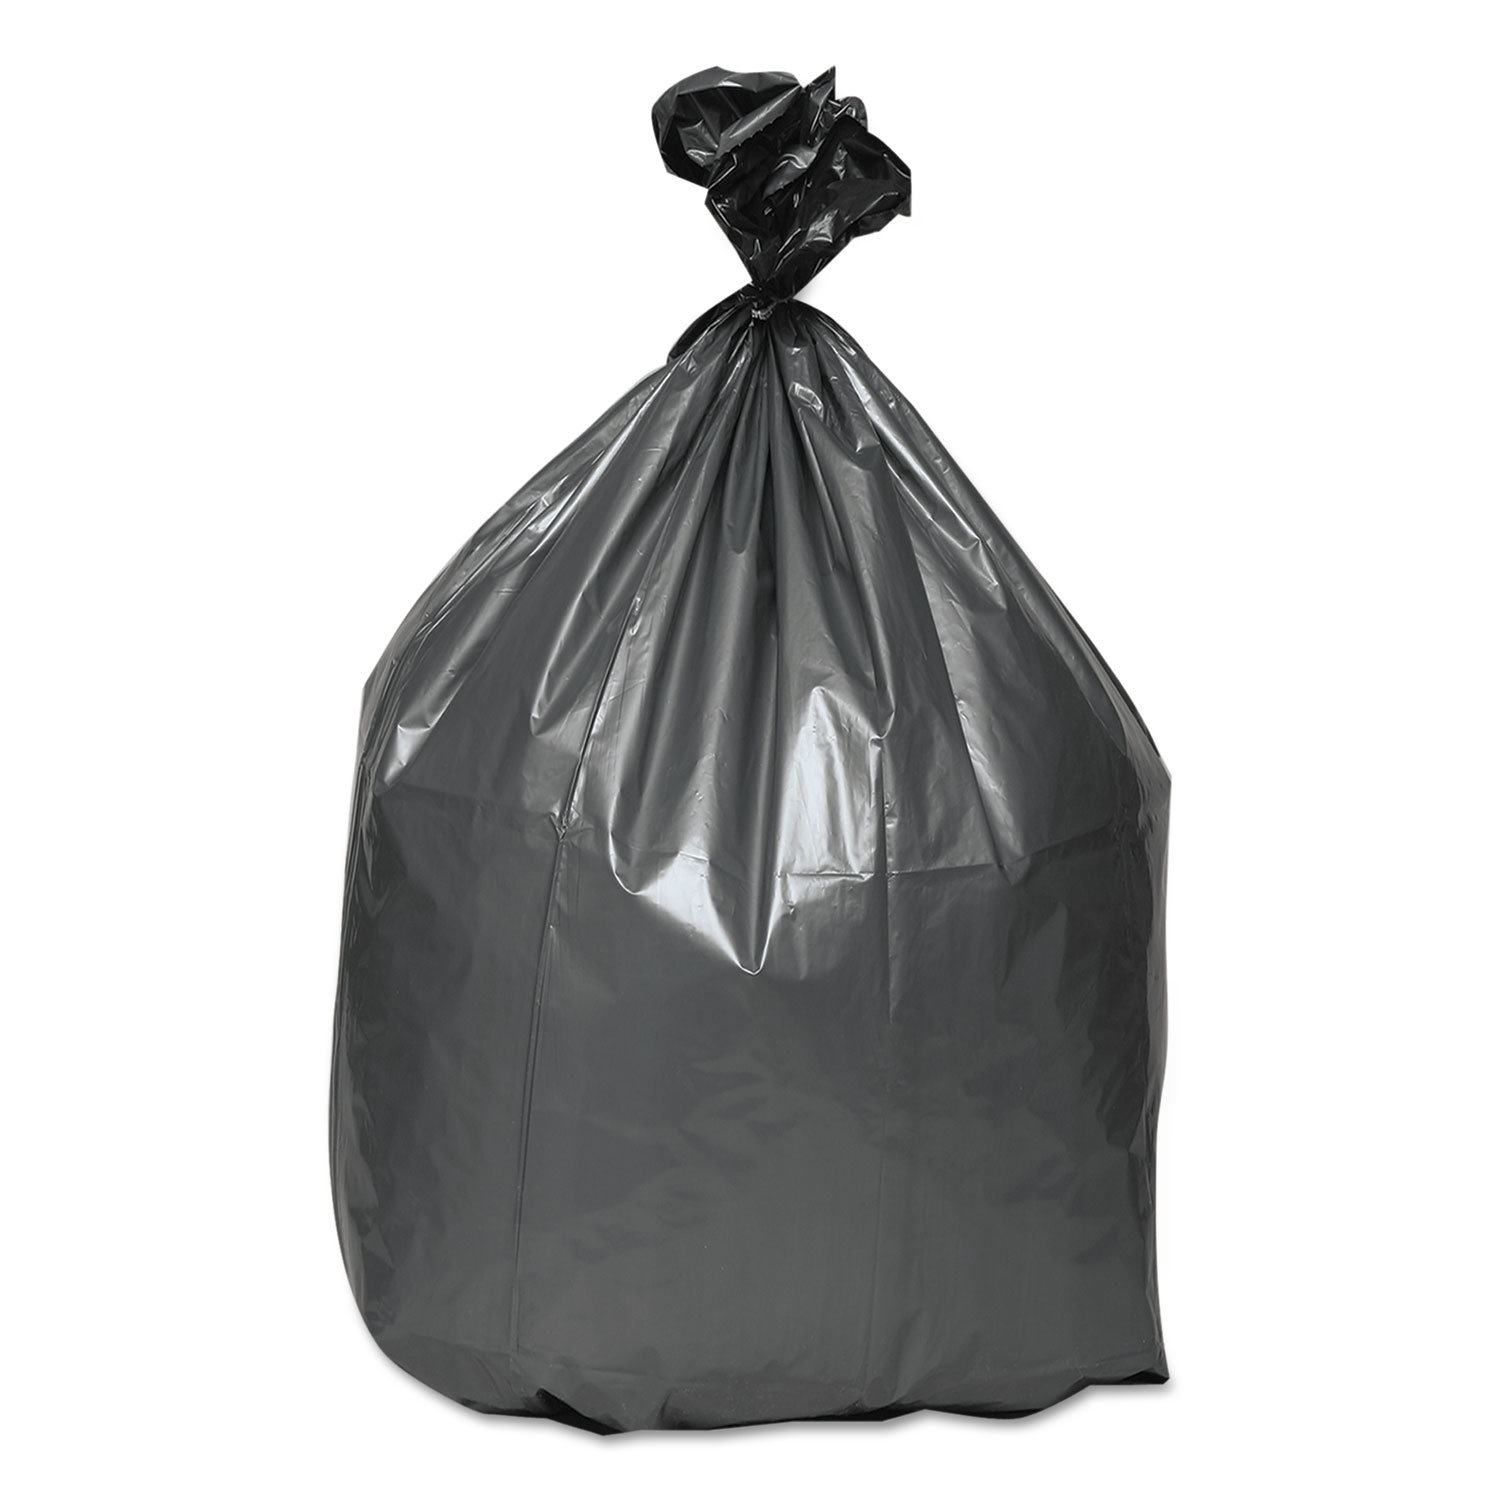 Black rubbish bags to be substituted by transparent ones